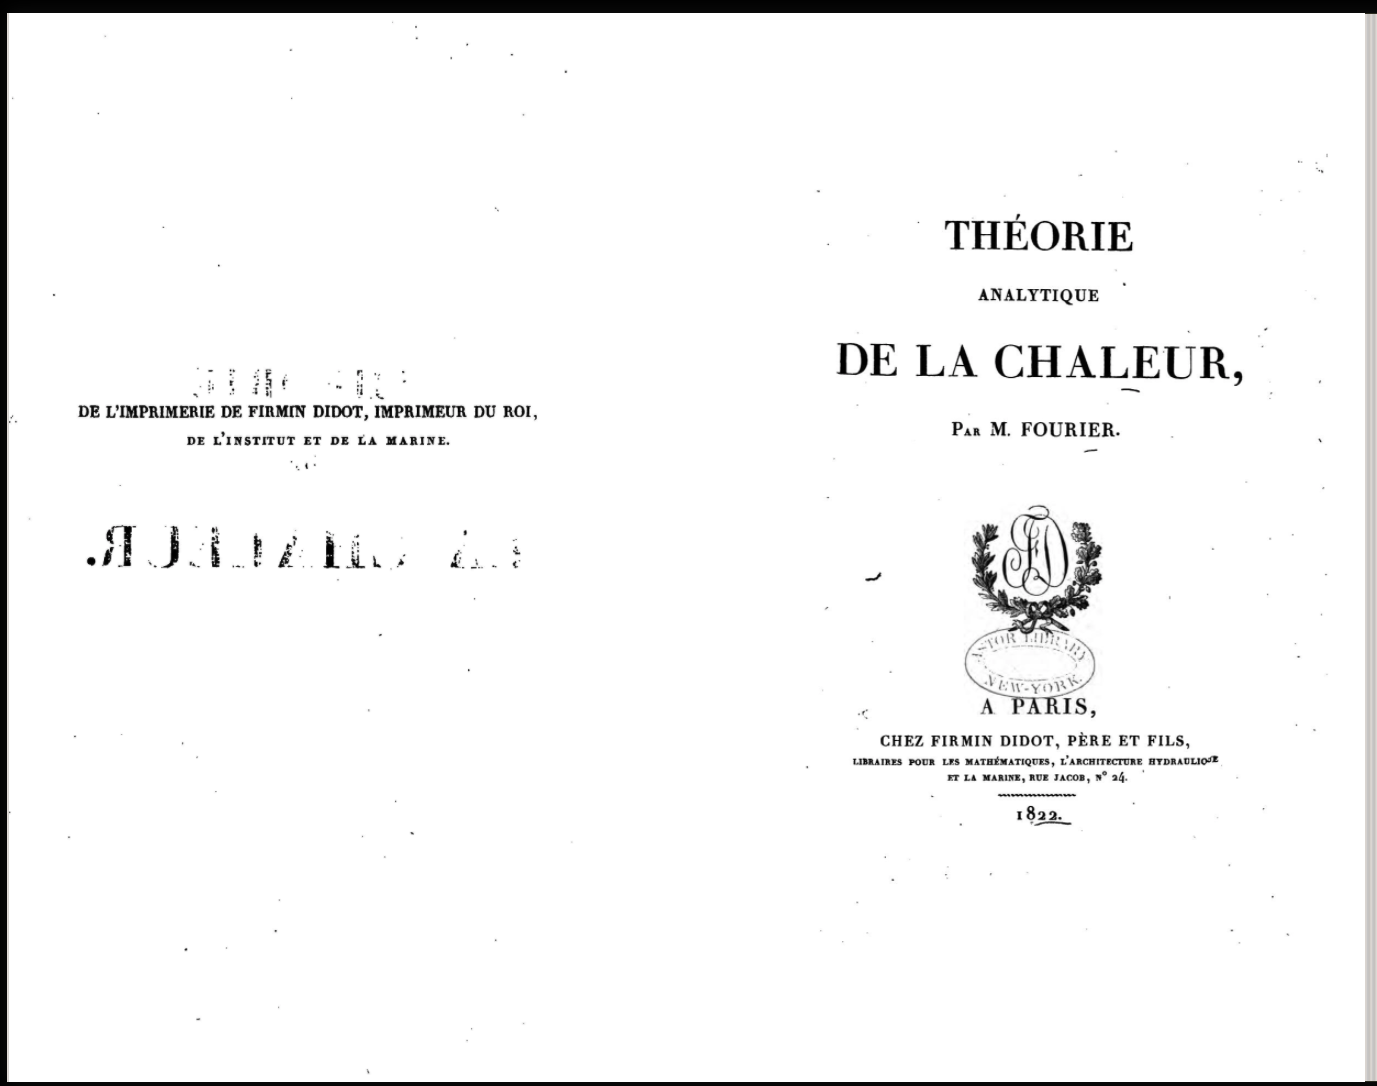 Page opening of Fourier's book showing its title page and the printer's identification on the page facing title page. The way the book was scanned did not show the gutter between the two page